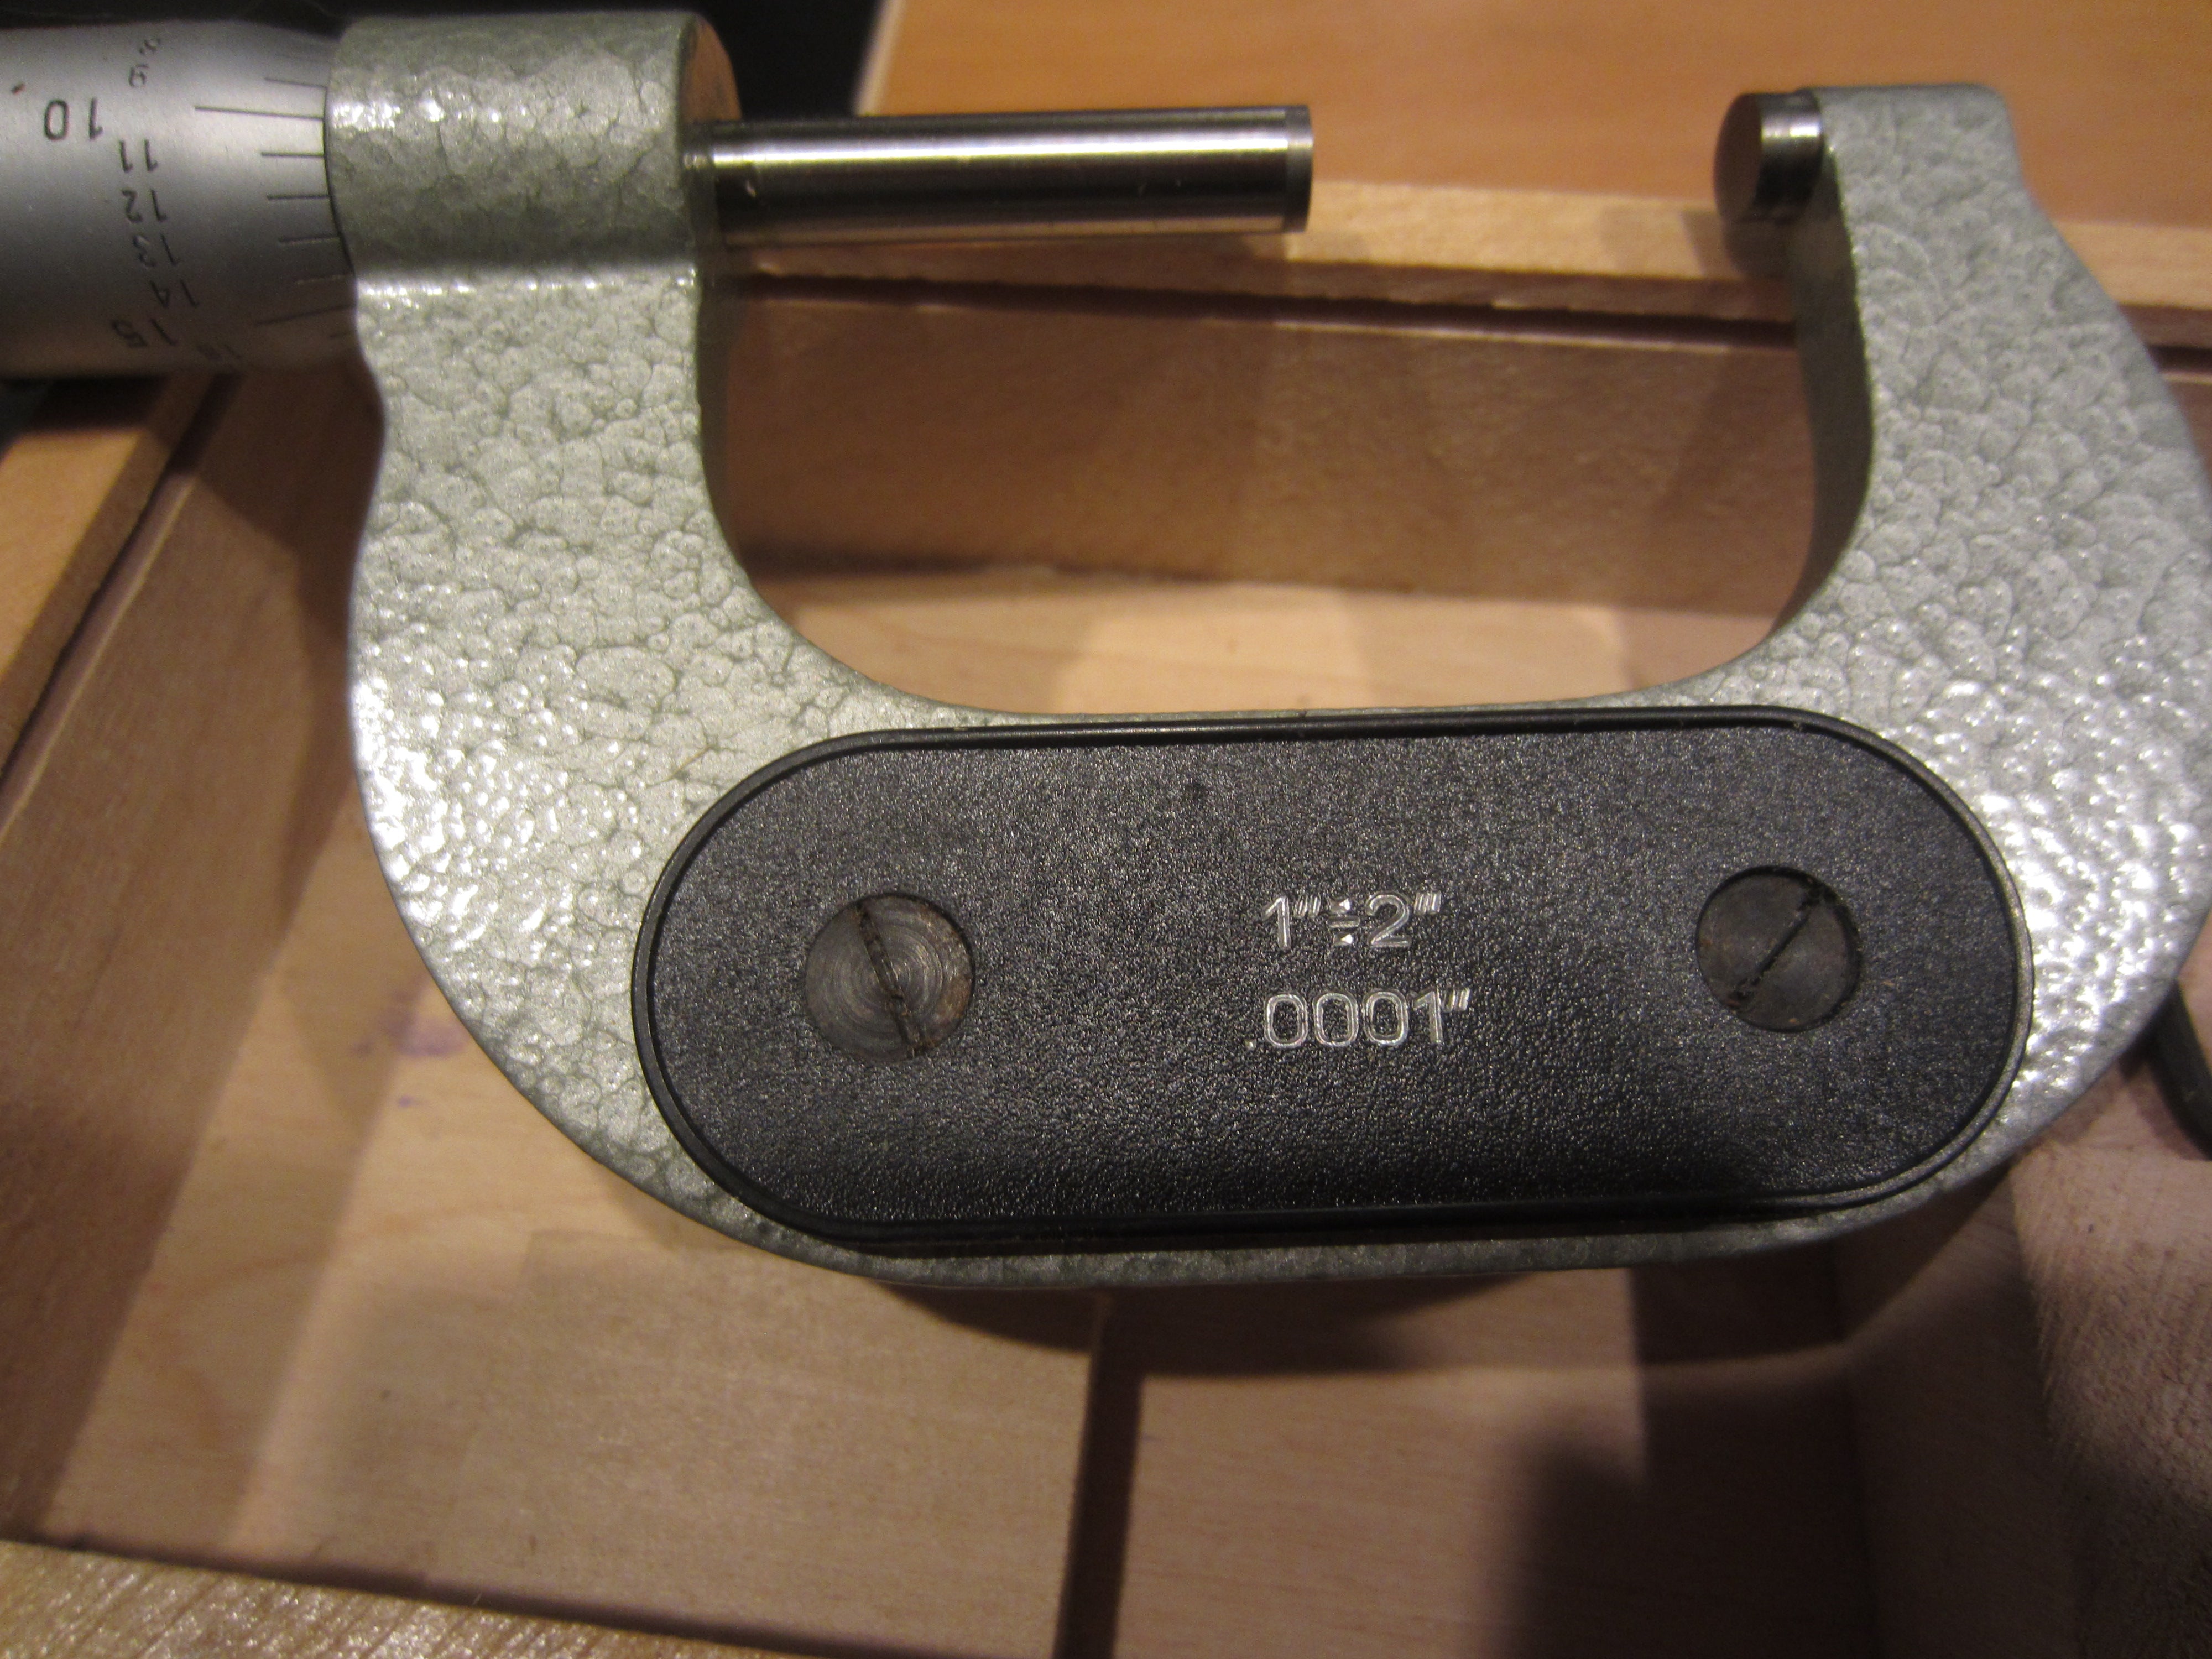 VIS 1"-2" Outside Micrometer Made in Poland